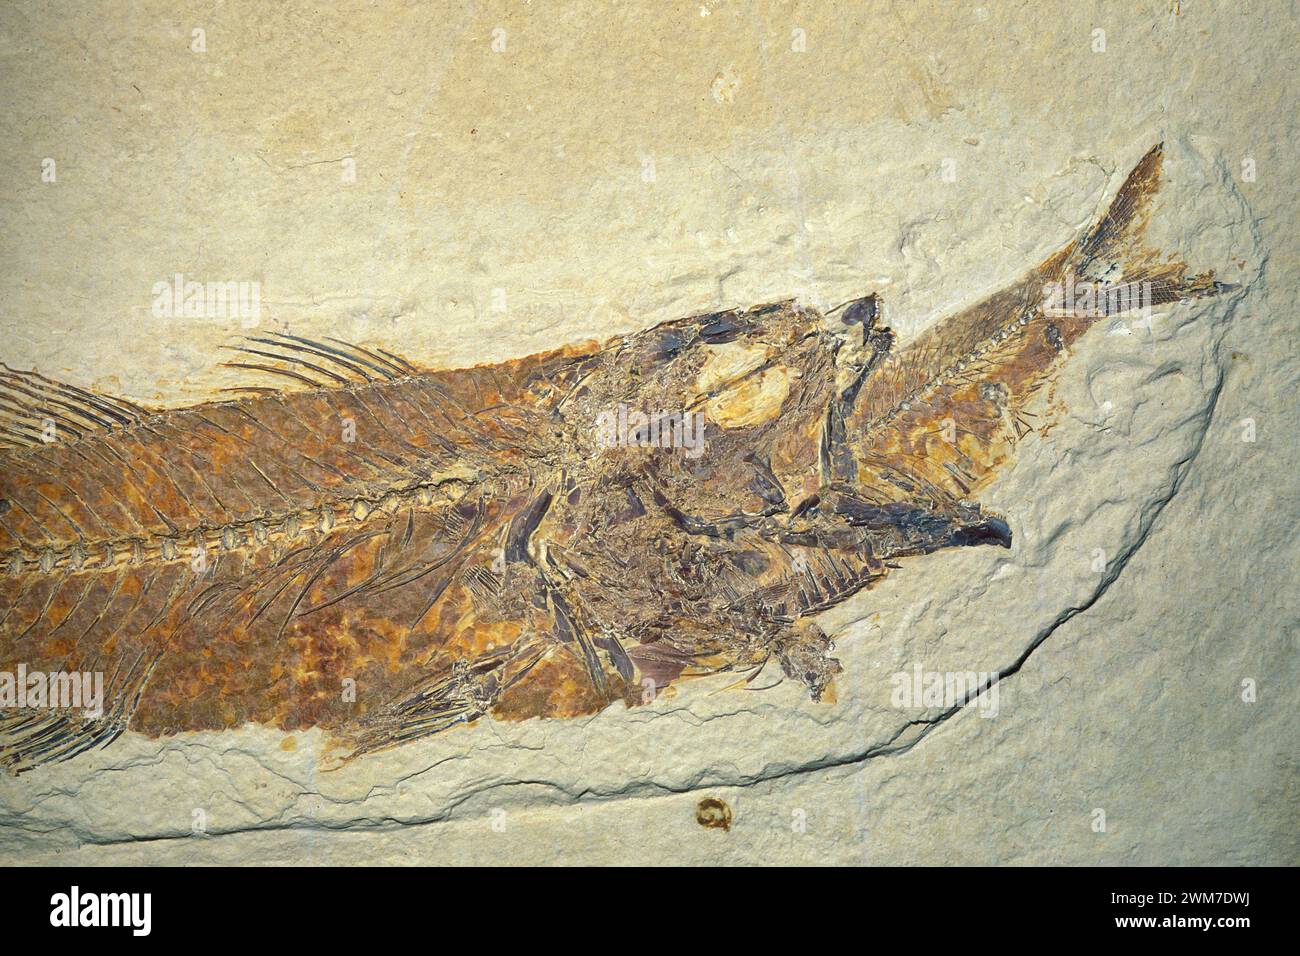 Fossil fish, Mioplosus labracoides, eating a smaller fish, Eocene Period, Wyoming Stock Photo